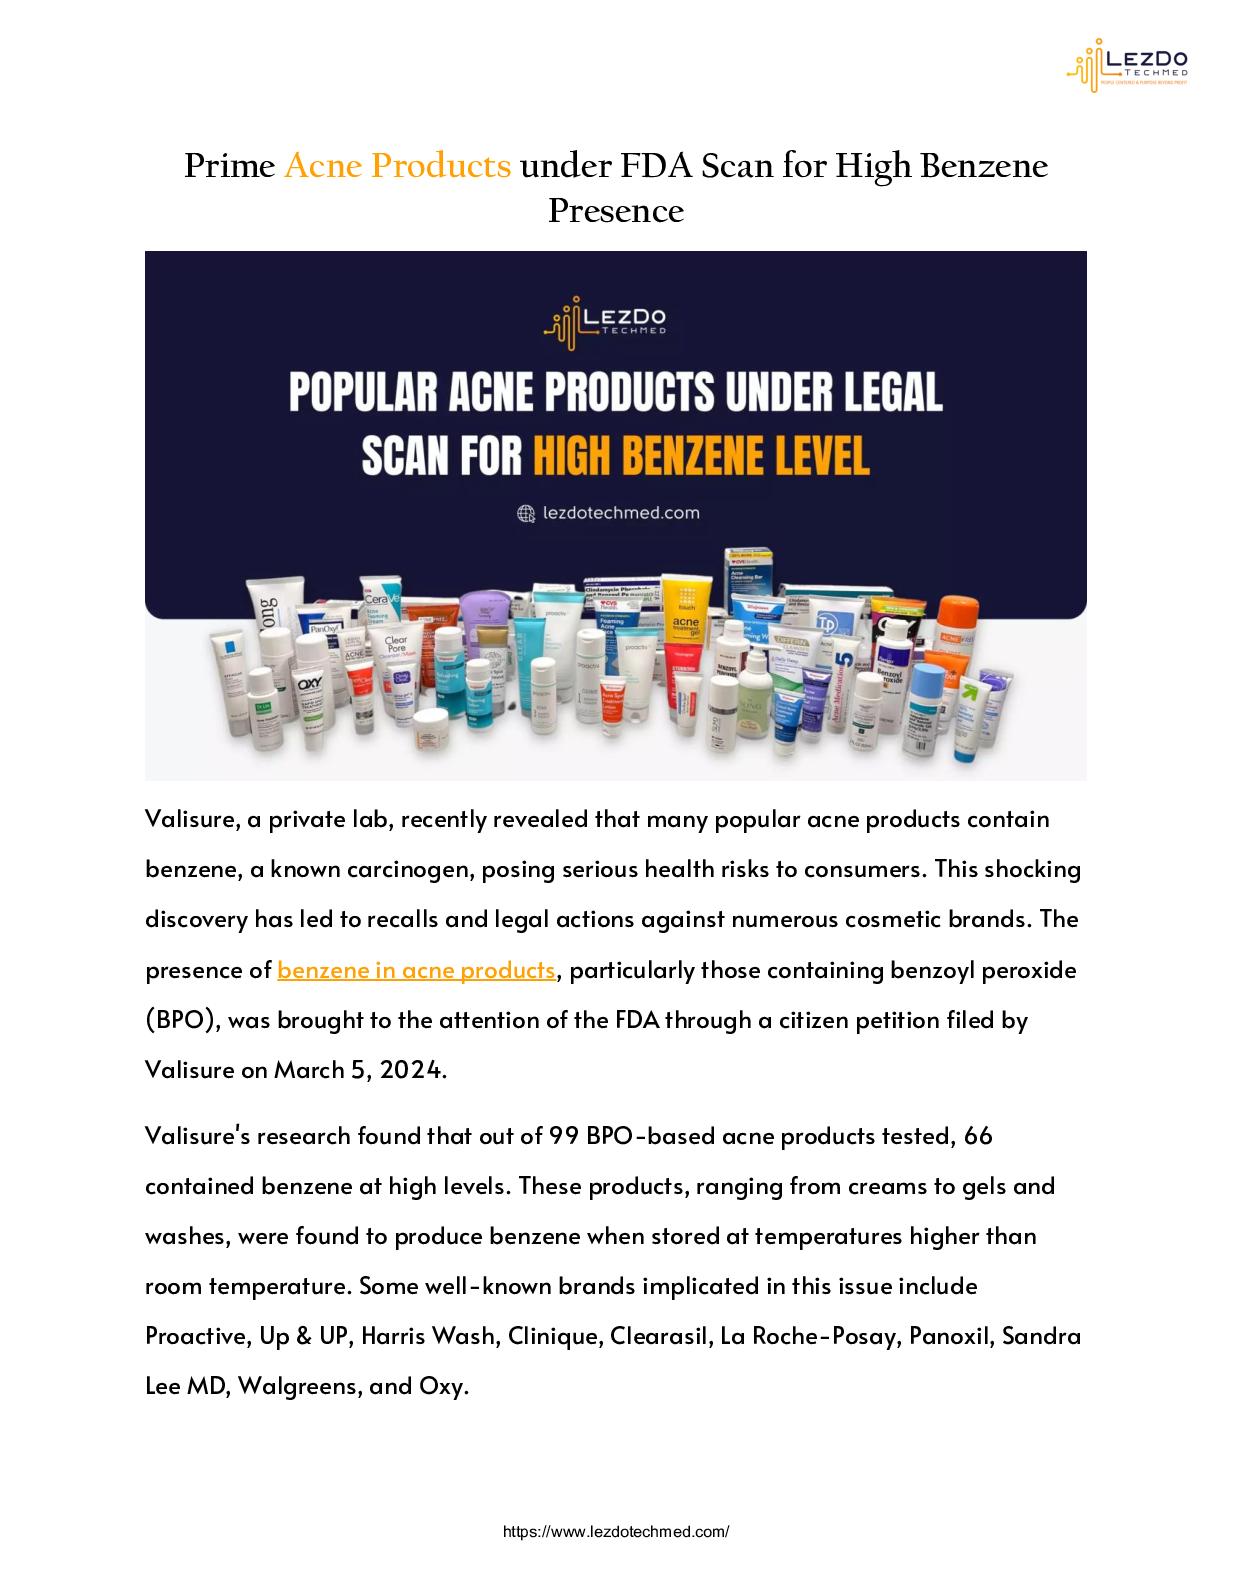 Prime Acne Products under FDA Scan for High Benzene Presence